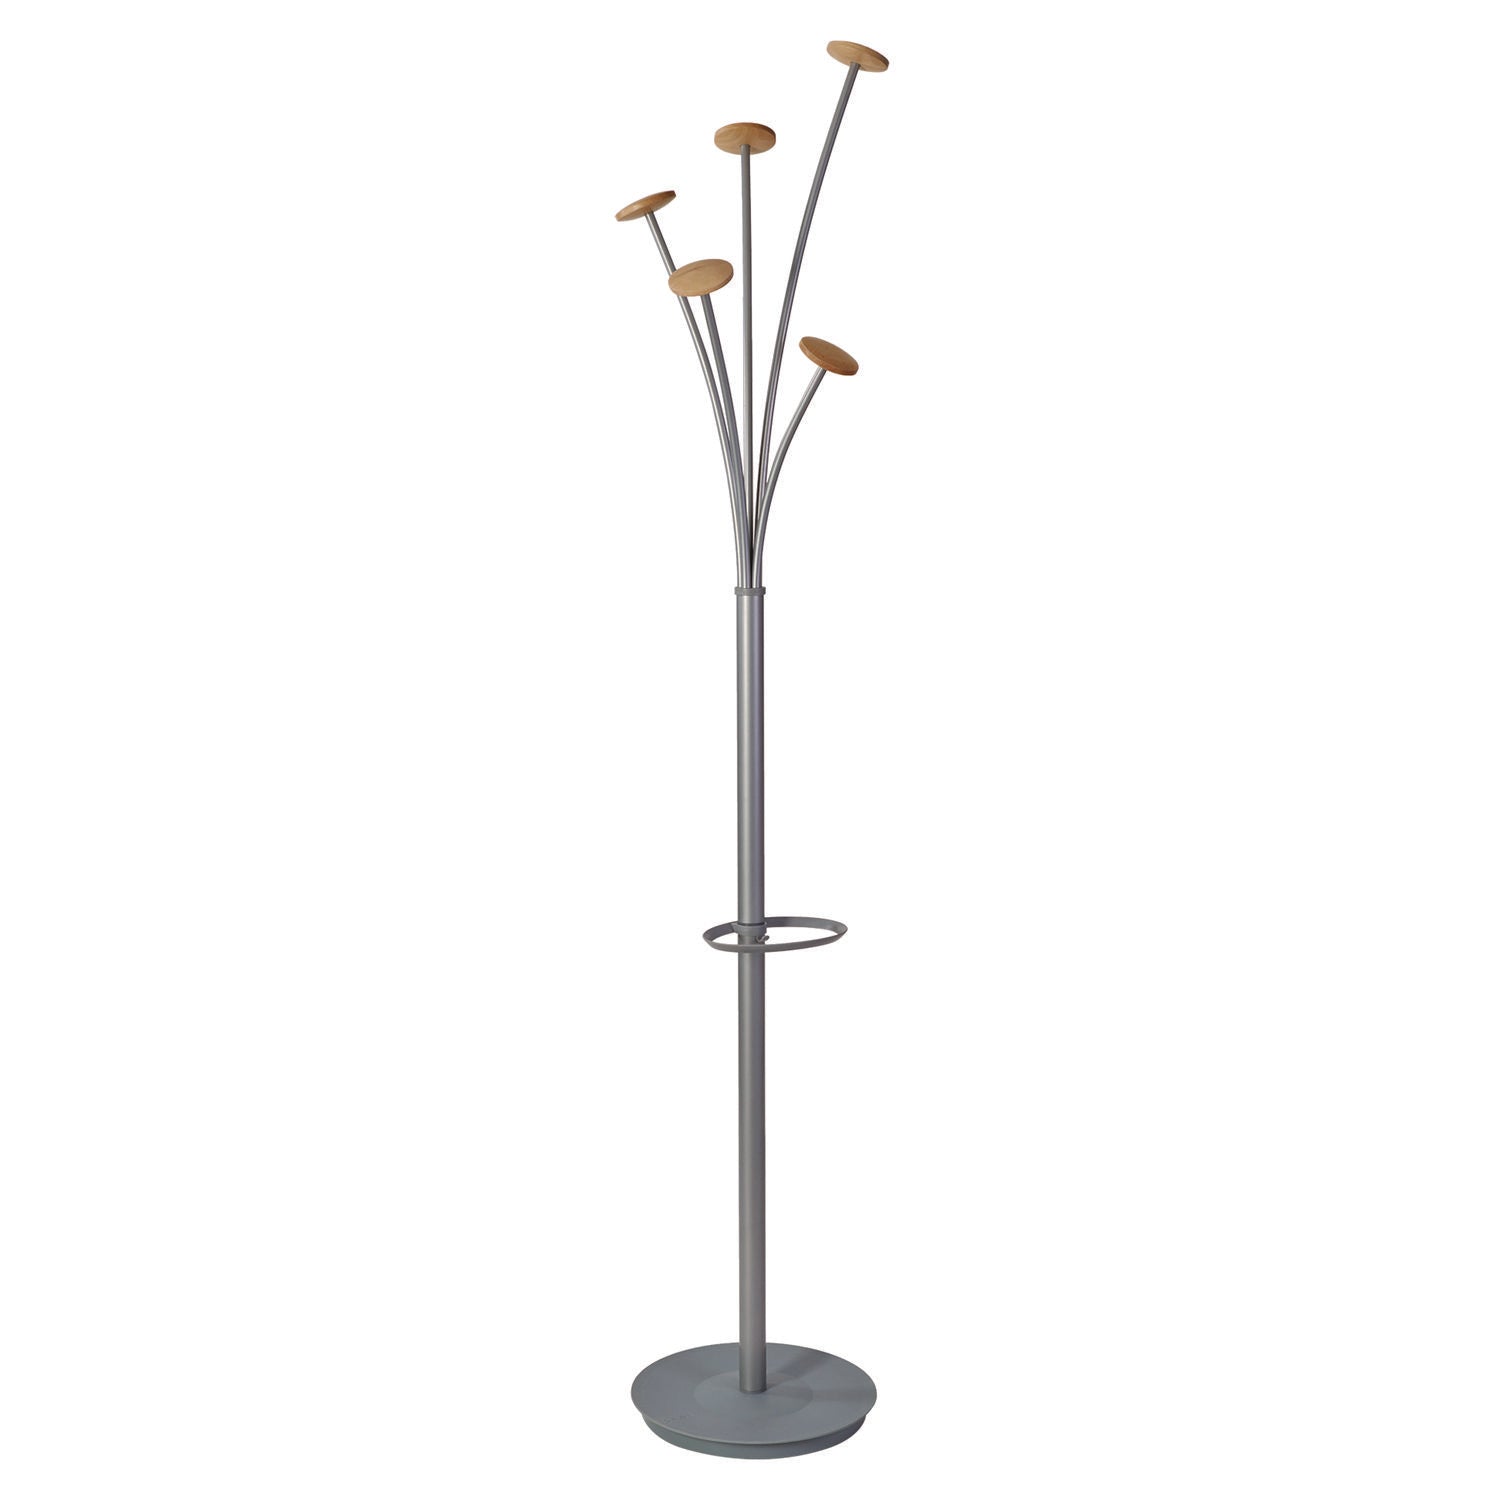 festival-coat-stand-with-umbrella-holder-five-knobs-1397-x-14-x-7362-gray_abapmfestwm - 1